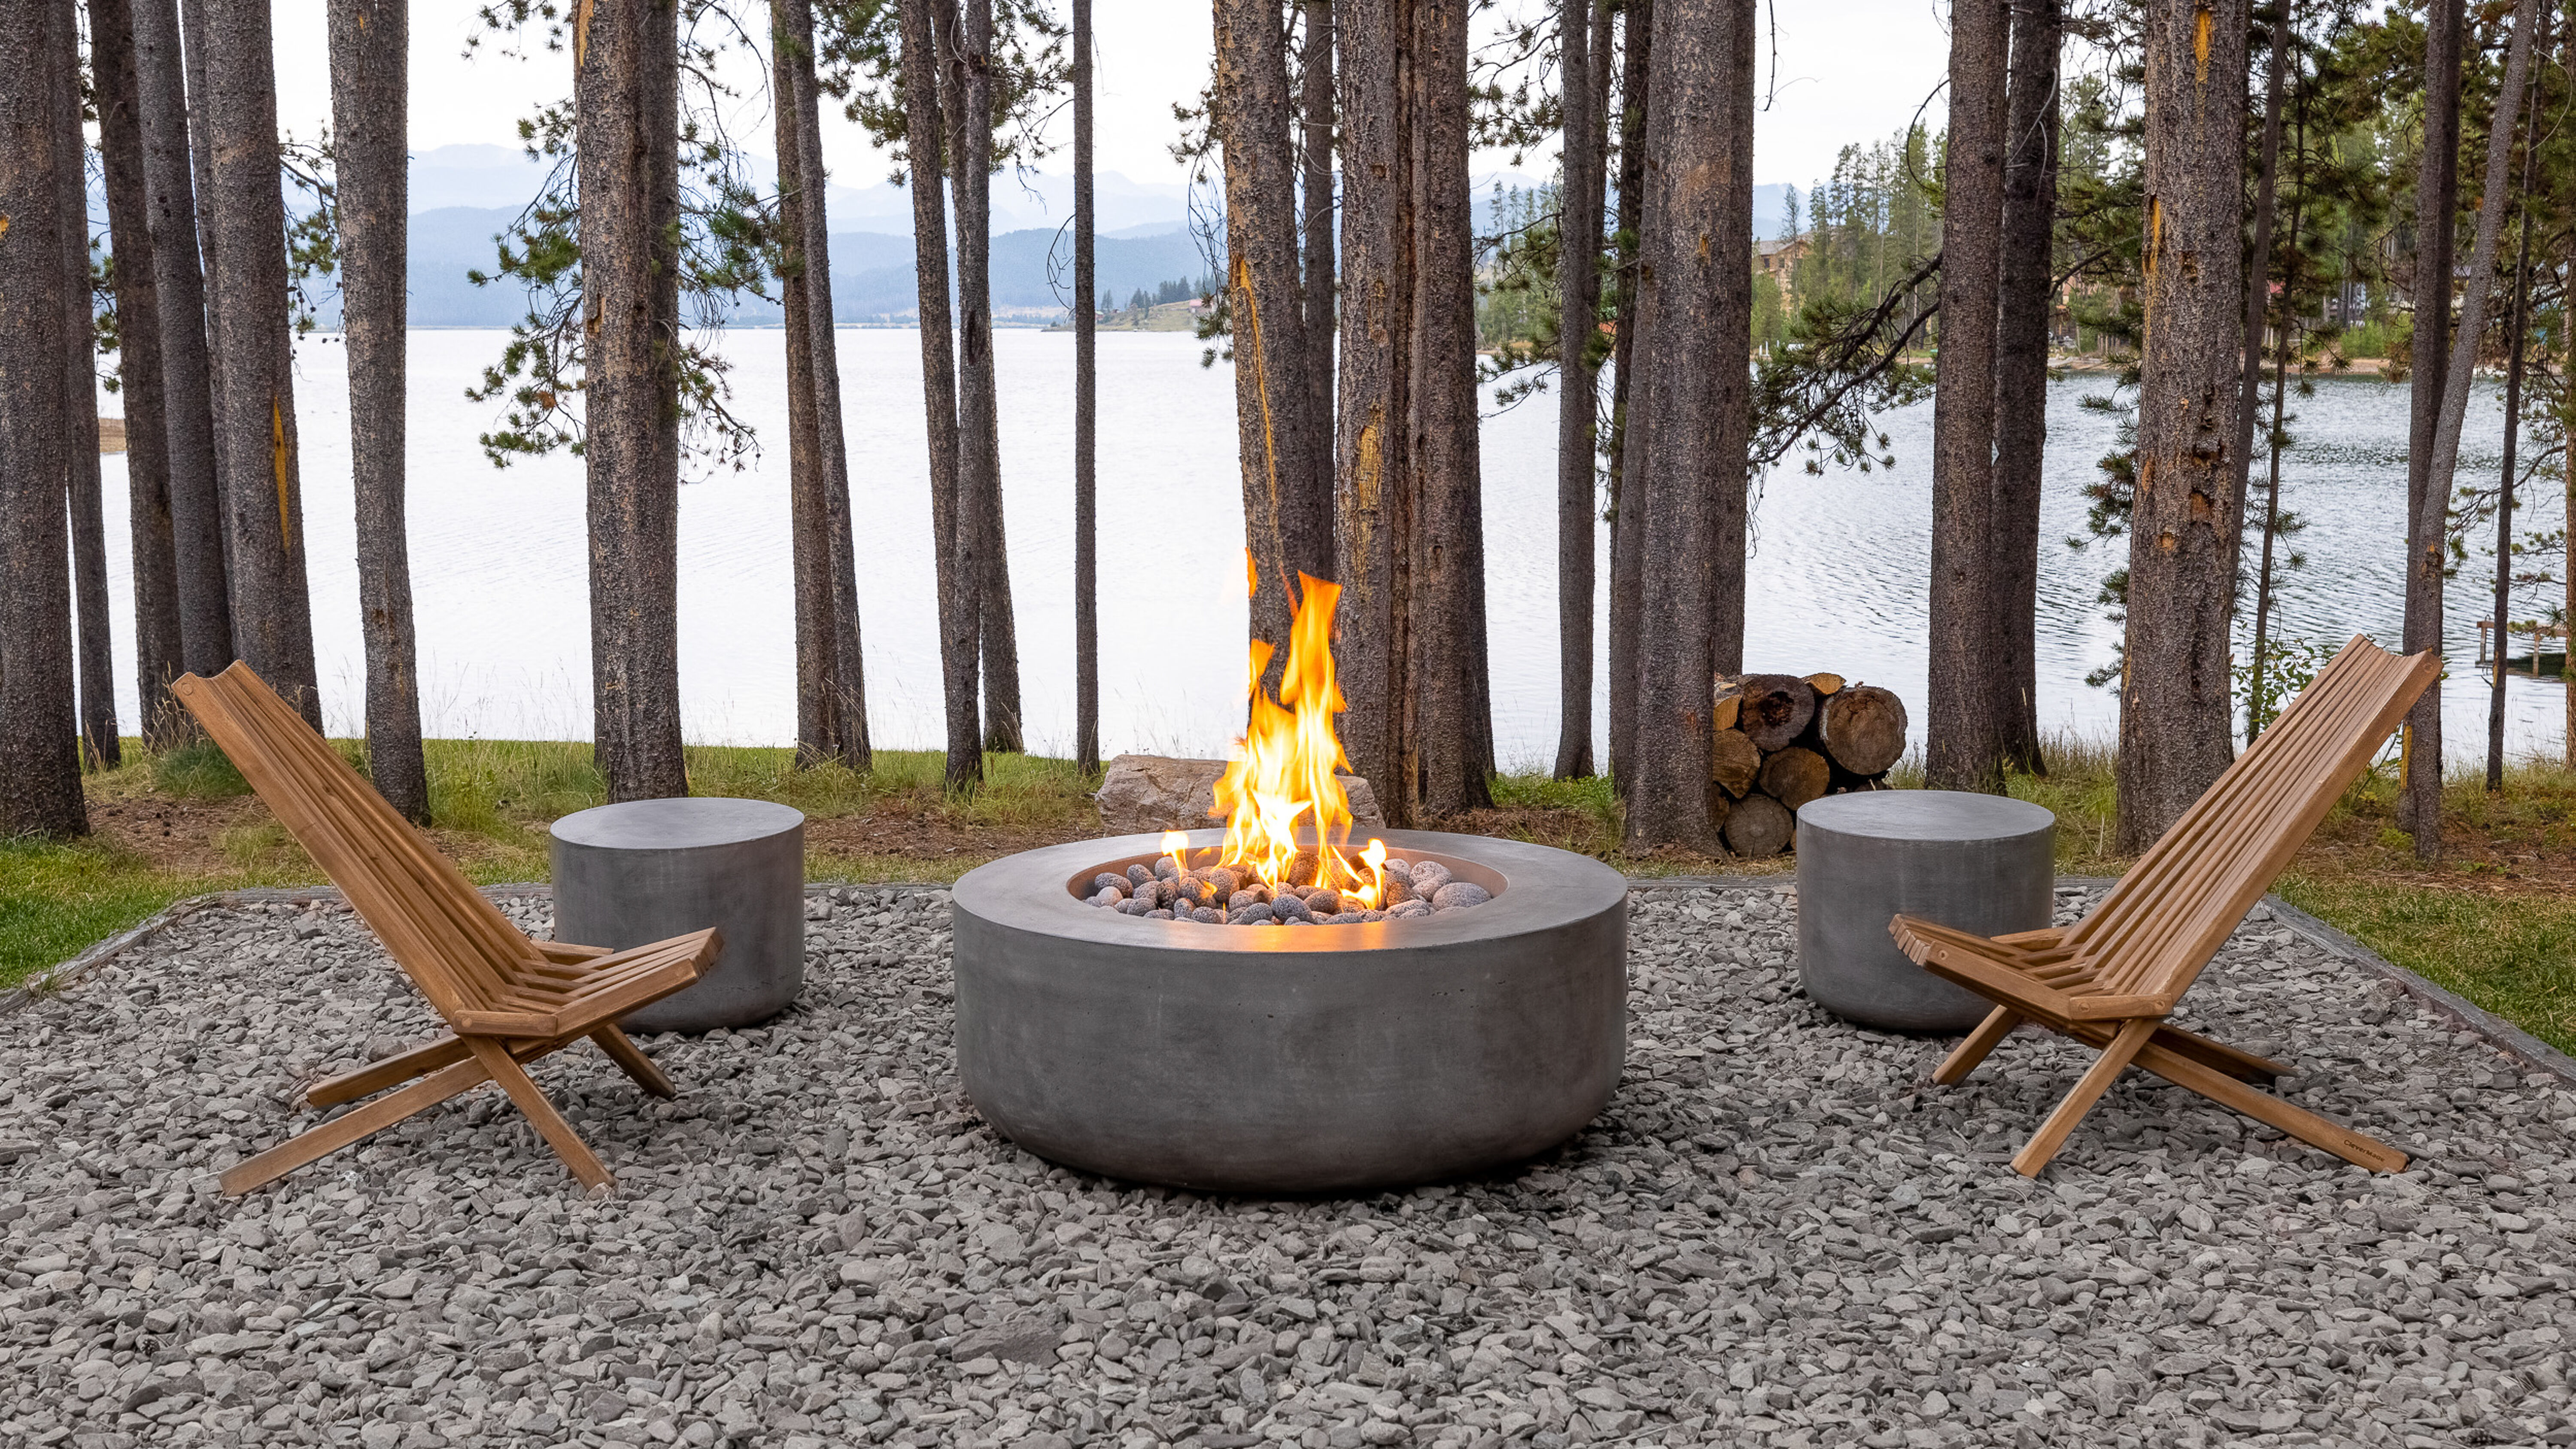 A rustic outdoor campfire in a wooded area at the lake with two wooden lounge chairs, two concrete stools, and a large concrete gas fire pit.